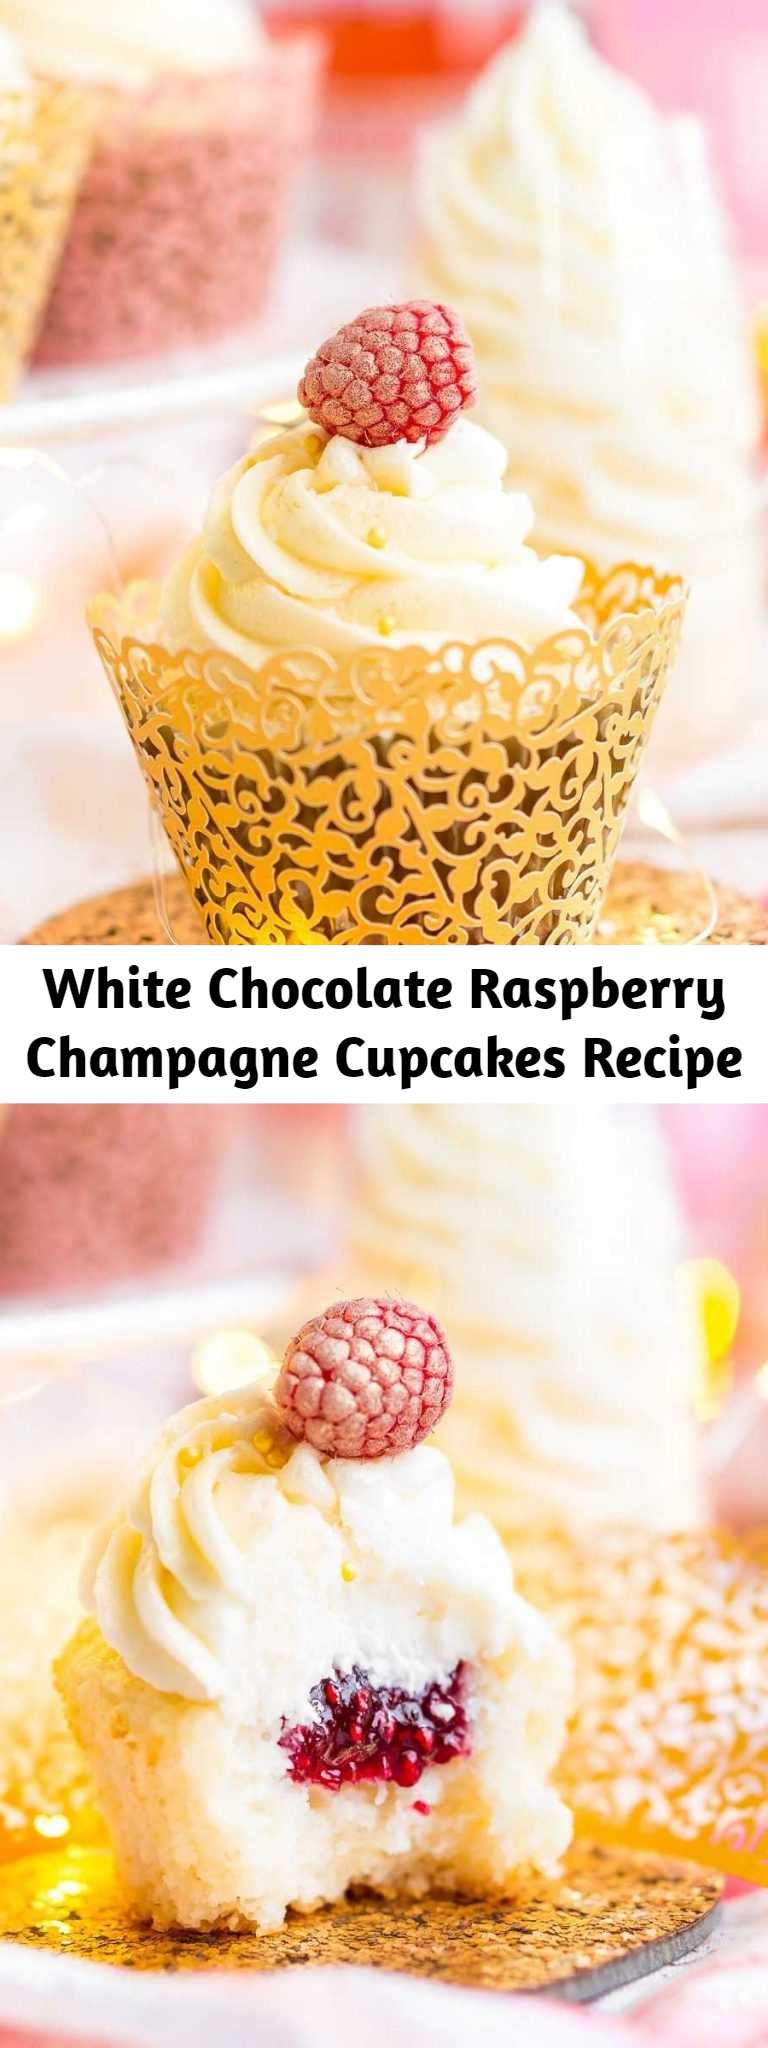 White Chocolate Raspberry Champagne Cupcakes Recipe - These White Chocolate Raspberry Champagne Cupcakes are perfect for New Year’s Eve, Bridal and Baby Showers, and Valentine’s Day! Light and fluffy white chocolate cake filled with raspberry filling and topped with a luscious champagne buttercream!